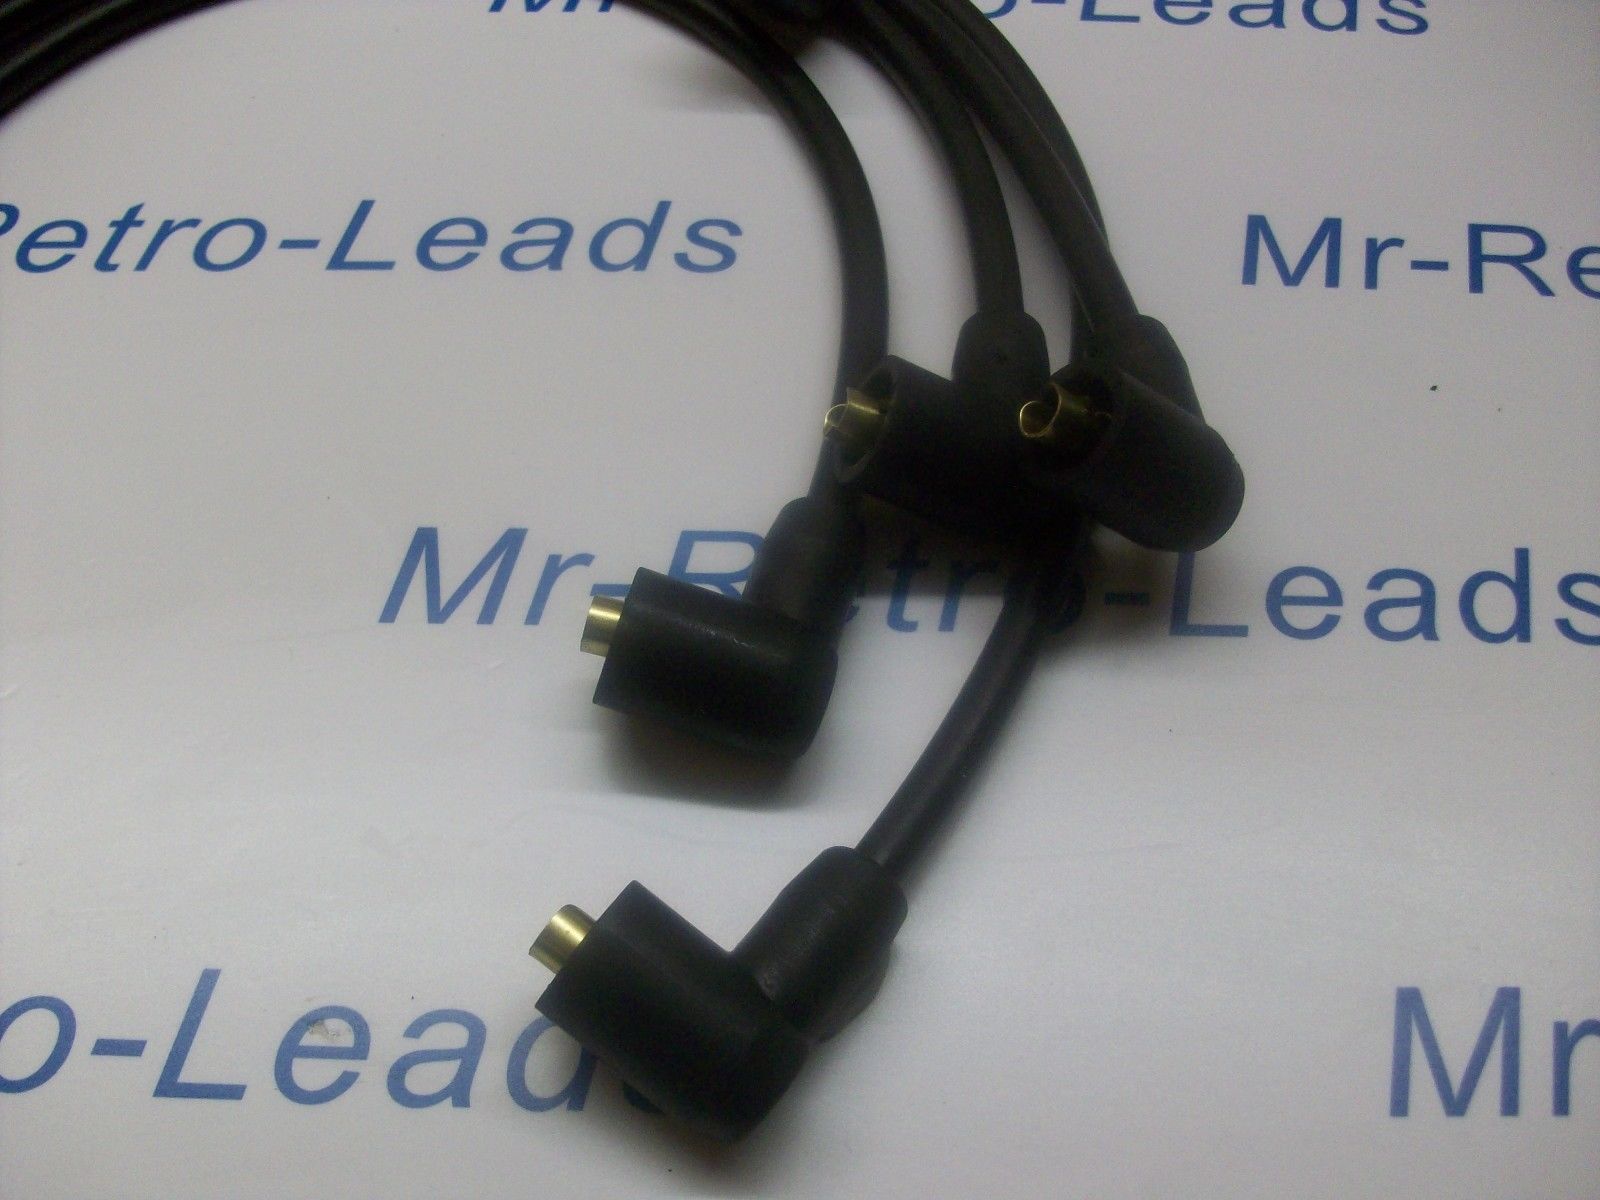 Black 8mm Performance Ignition Leads For Opel Manta Ht Quality Hand Built Leads